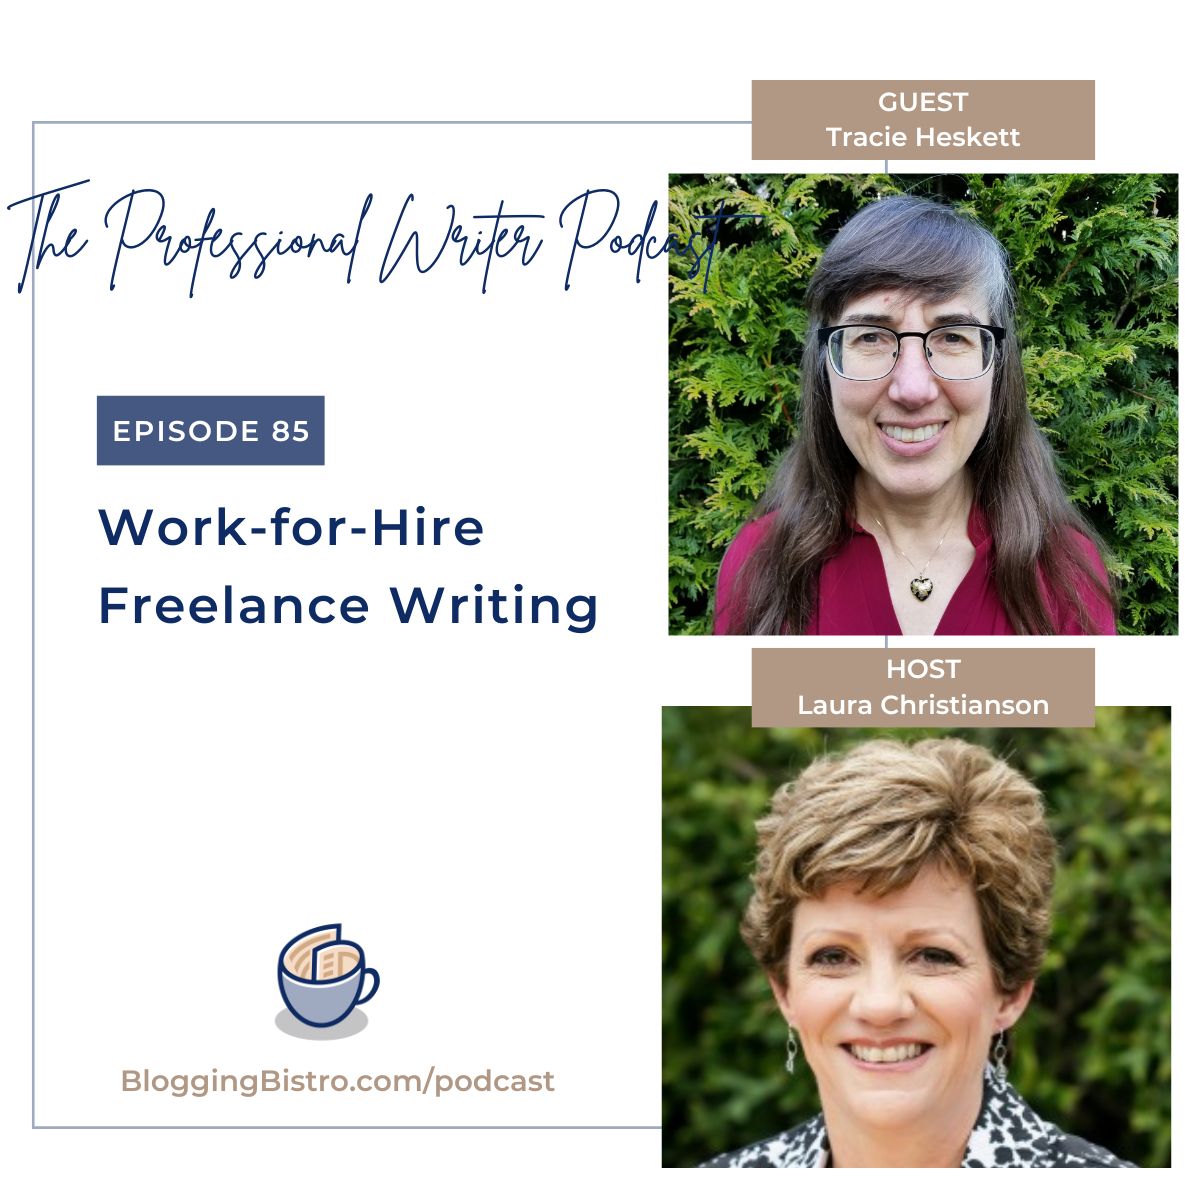 Work-for-Hire Freelance Writing, with Tracie Heskett